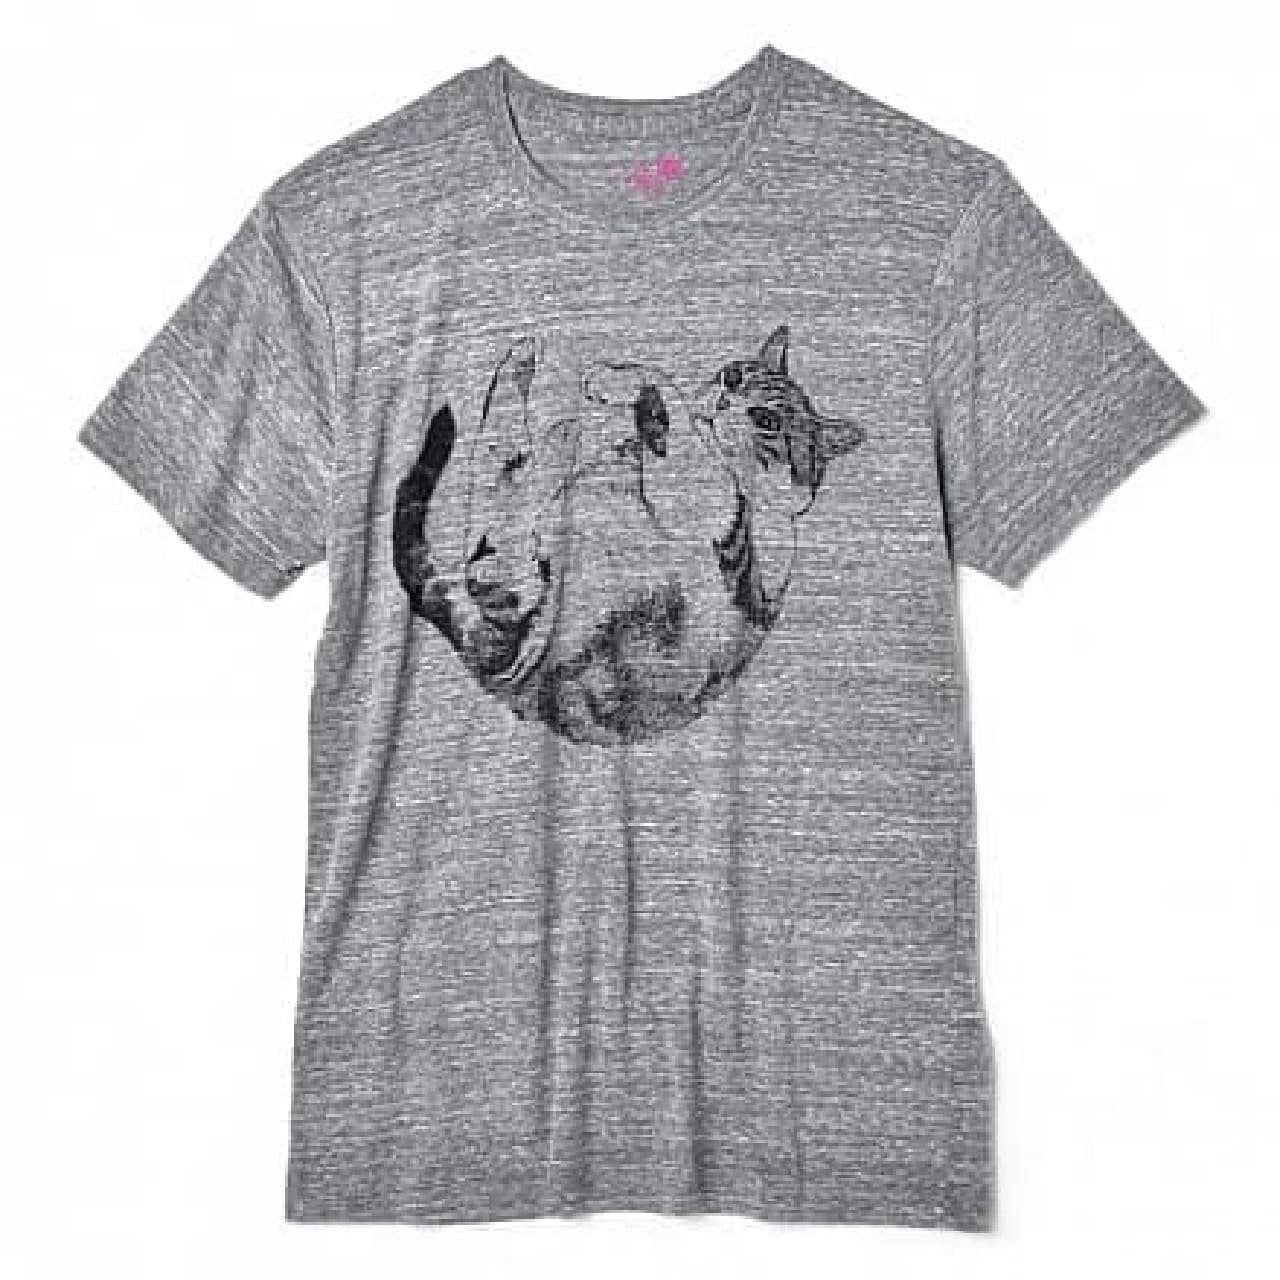 YOU + MORE! When you cross your arms, it's tight! Cat hug T-shirt